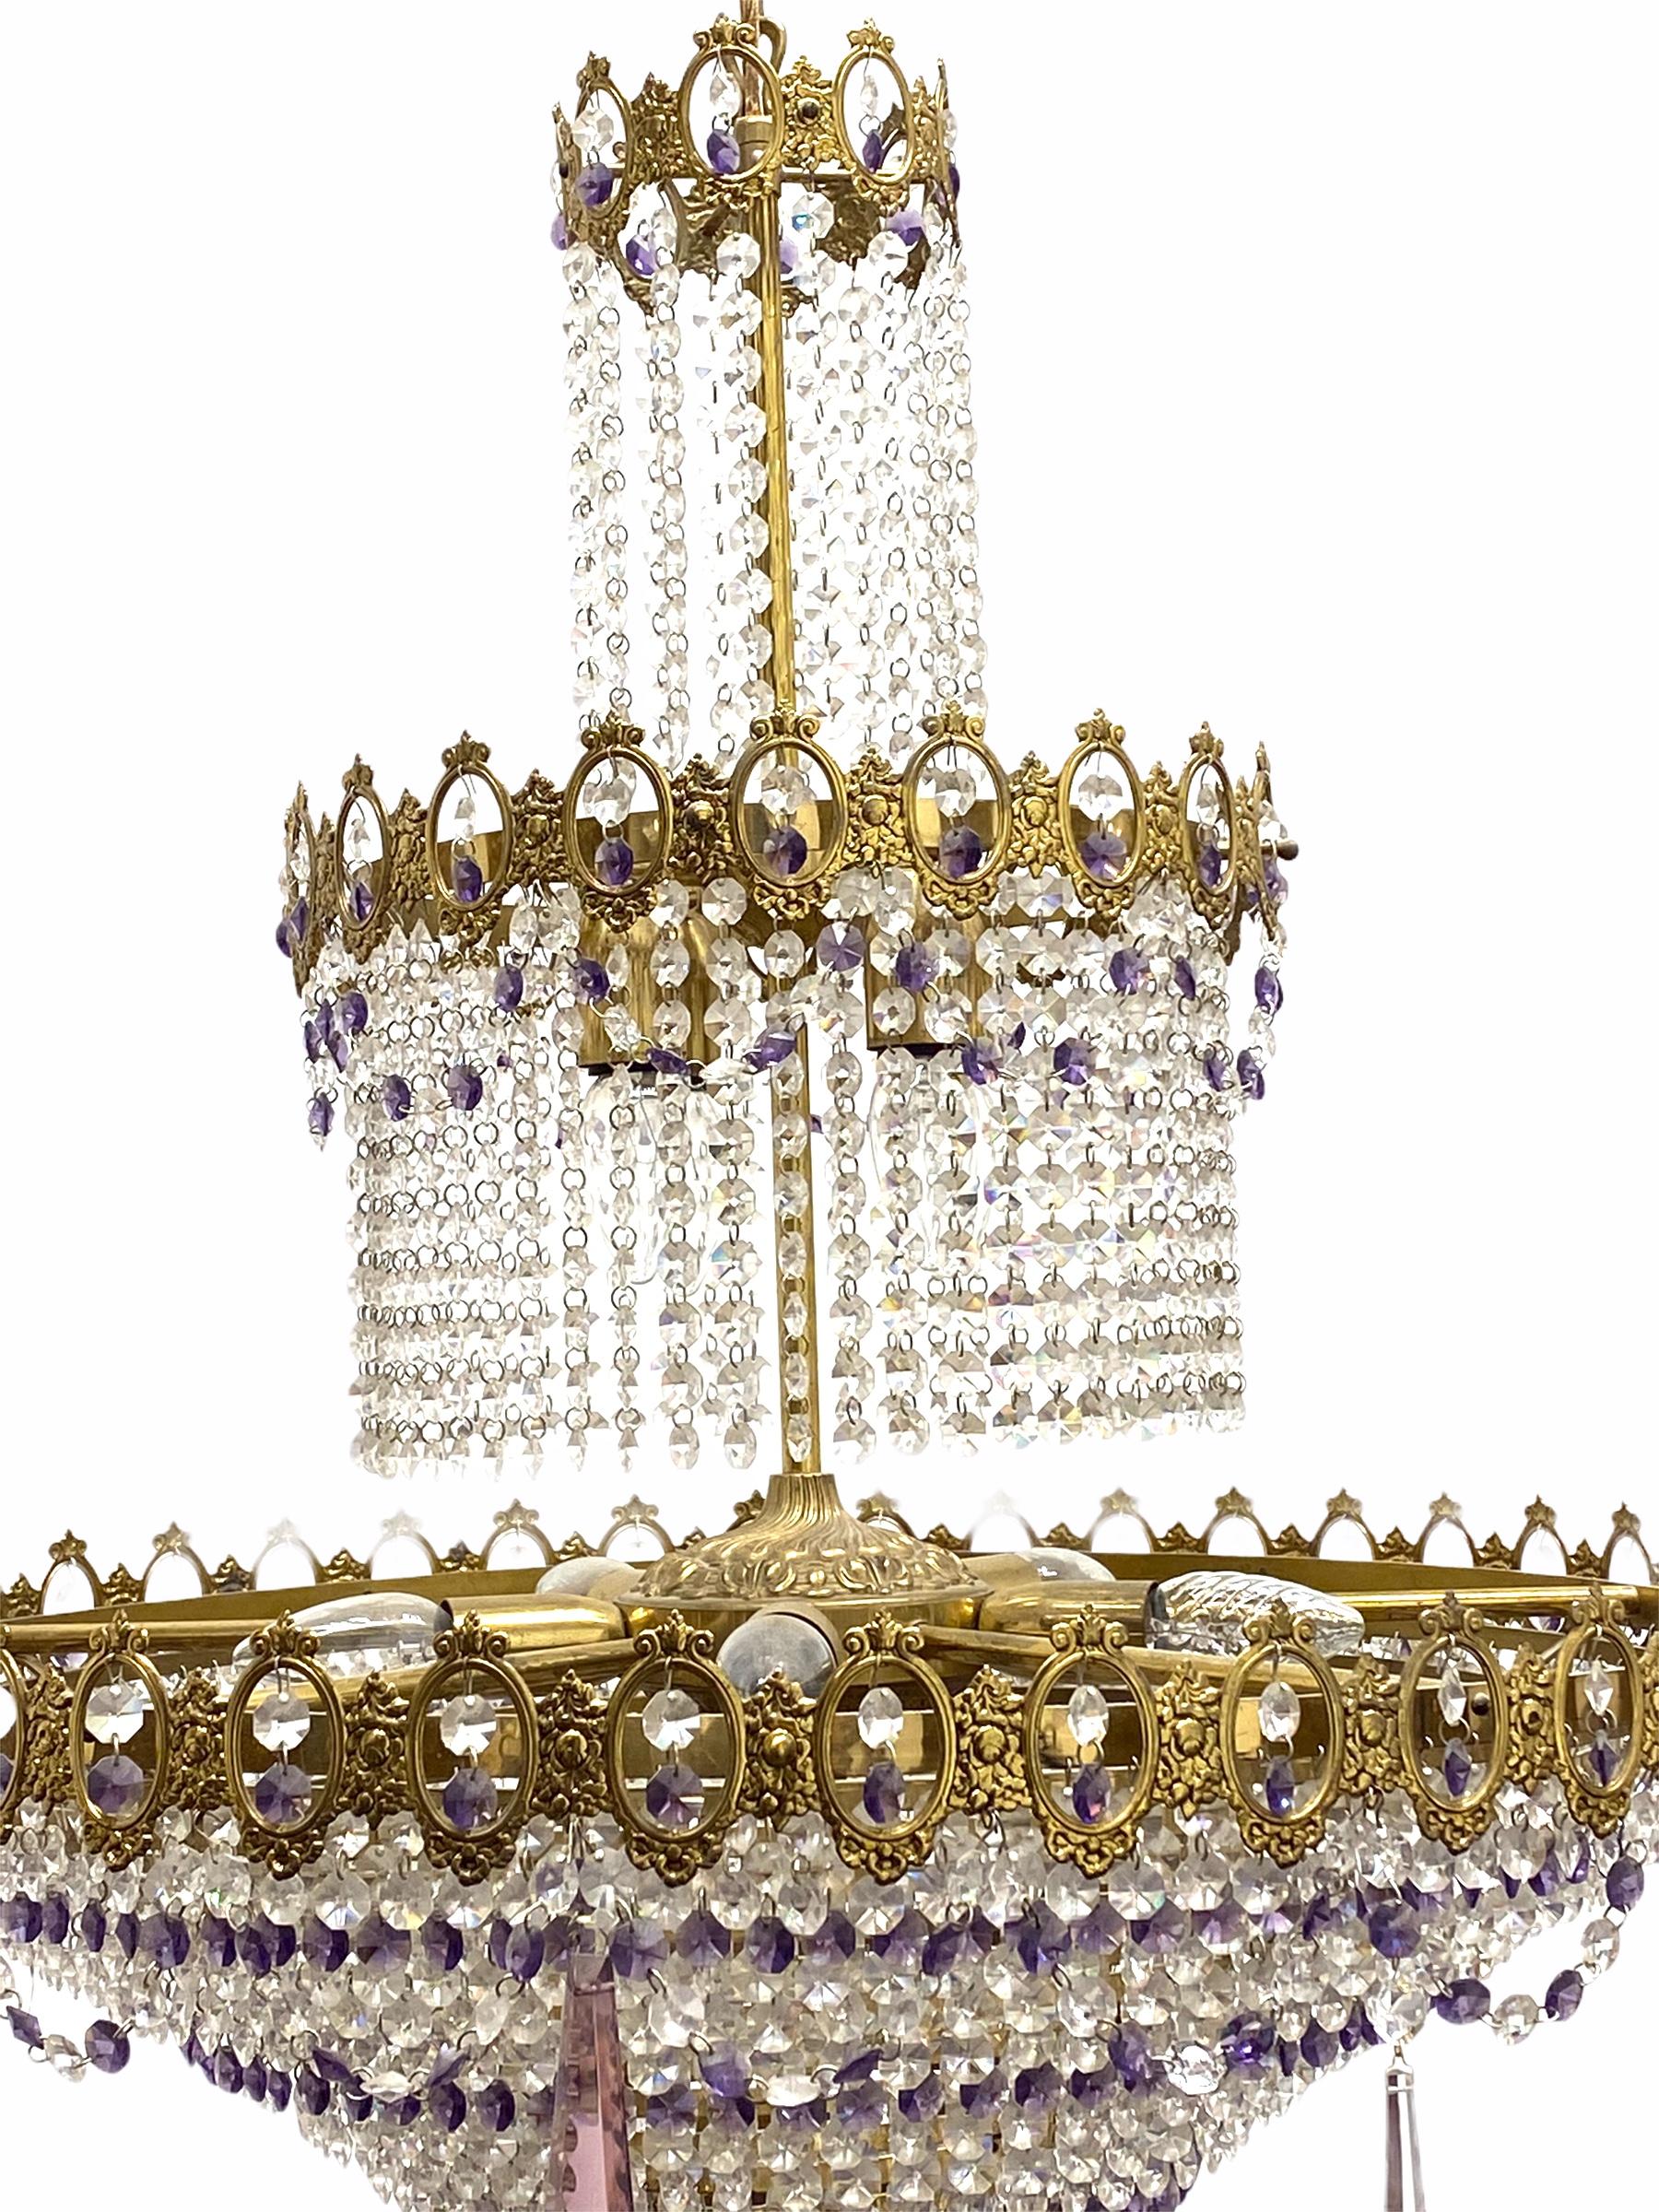 Austrian crystal chandelier with a solid bronze frame and faceted crystal, circa 1930s or older. This chandelier is perfect for large spaces, entryways, and hallways. A unique waterfall chandelier with a Hollywood Regency or Empire flair, the